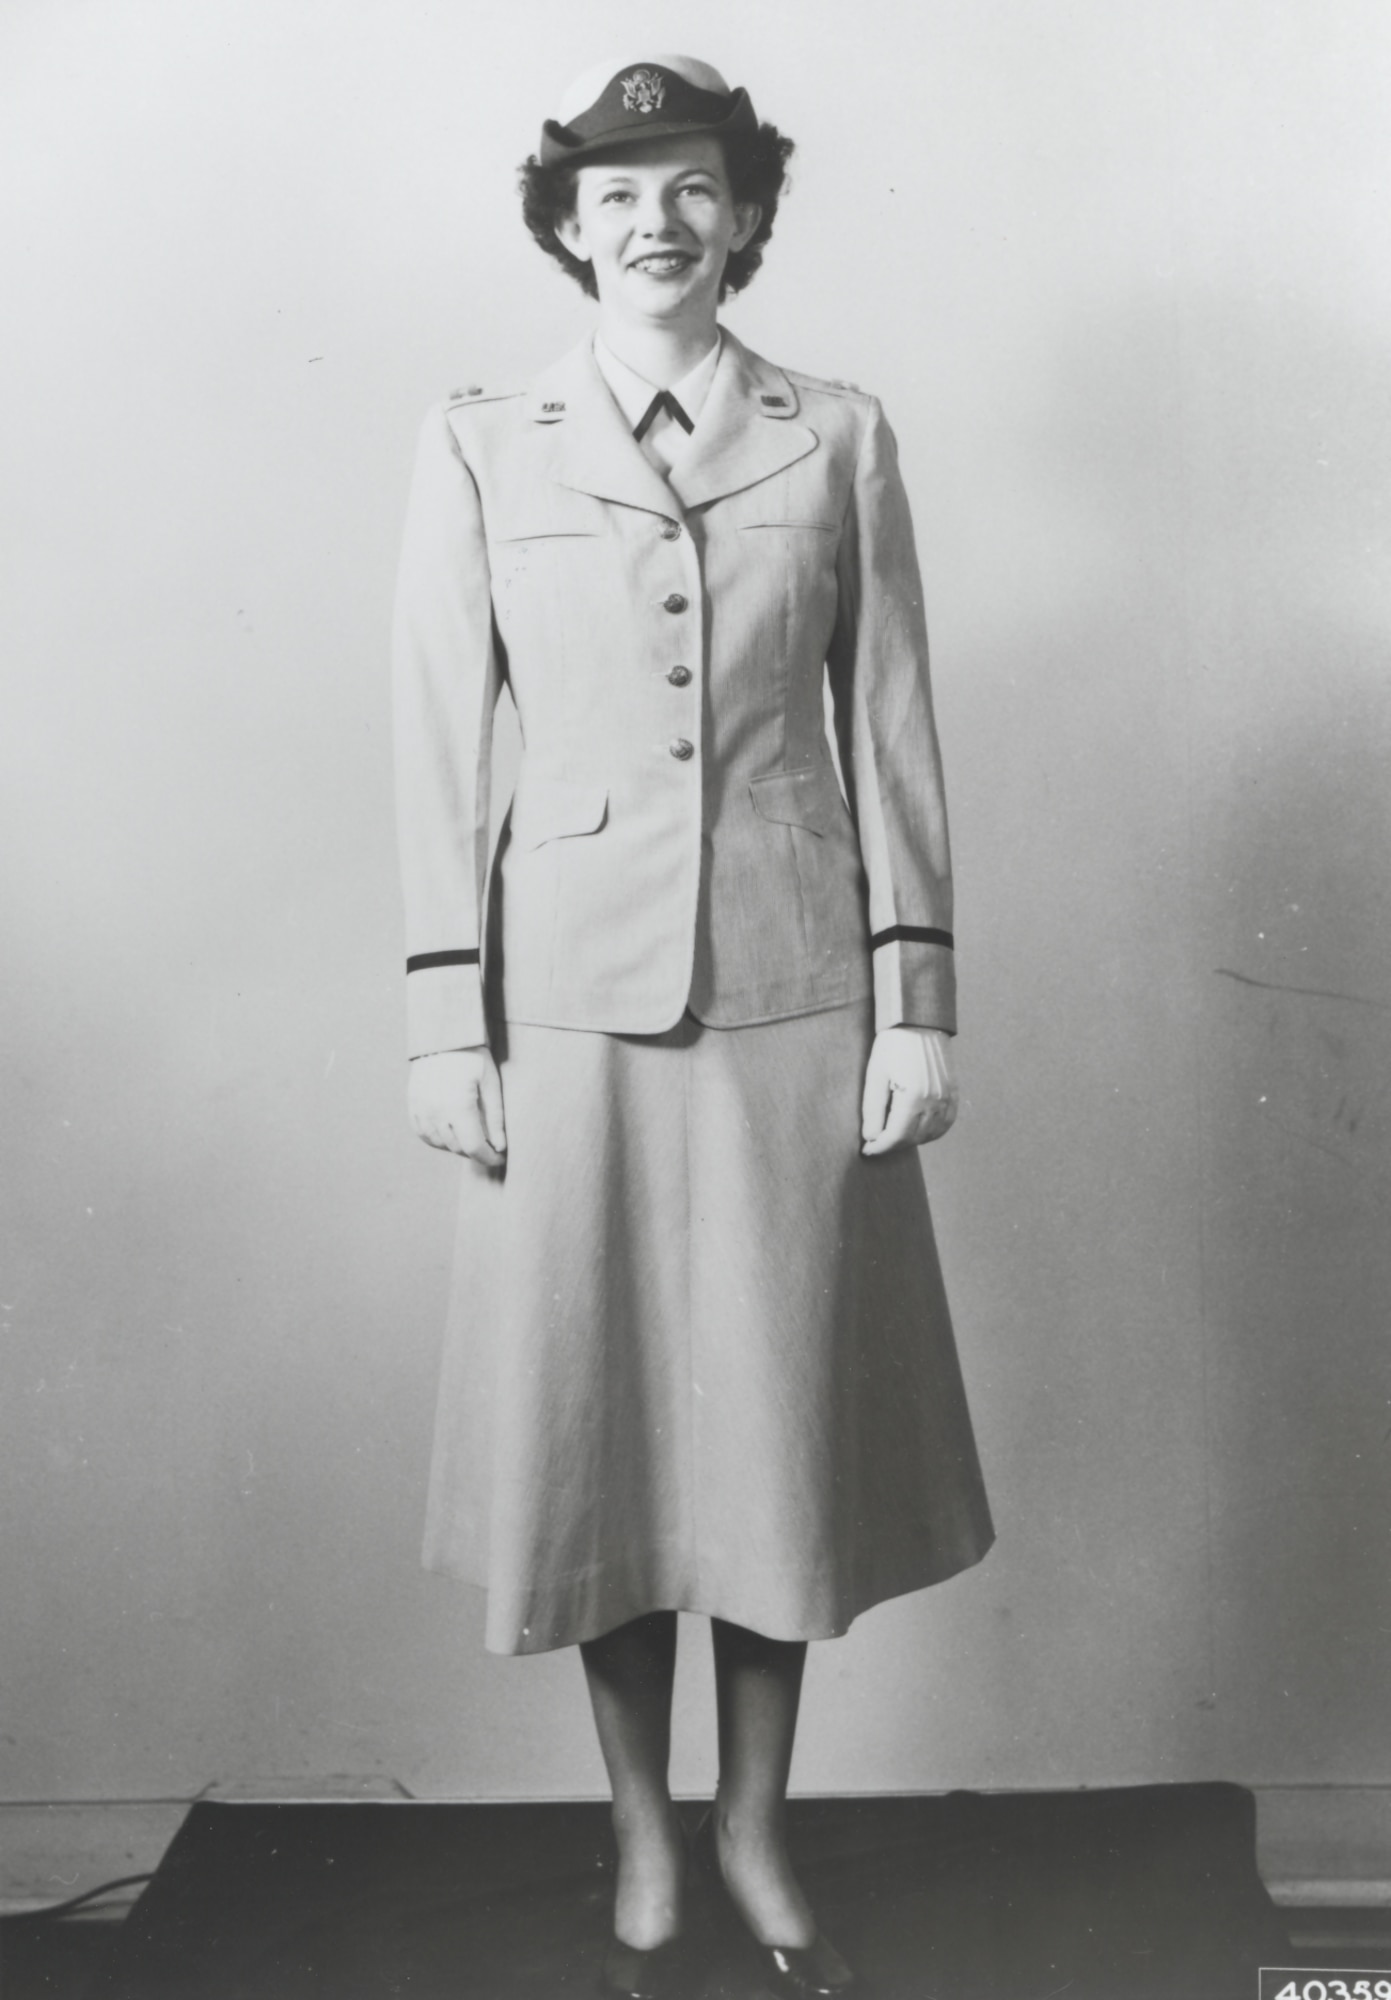 First uniforms for the new U.S. Air Force, early 1950's.